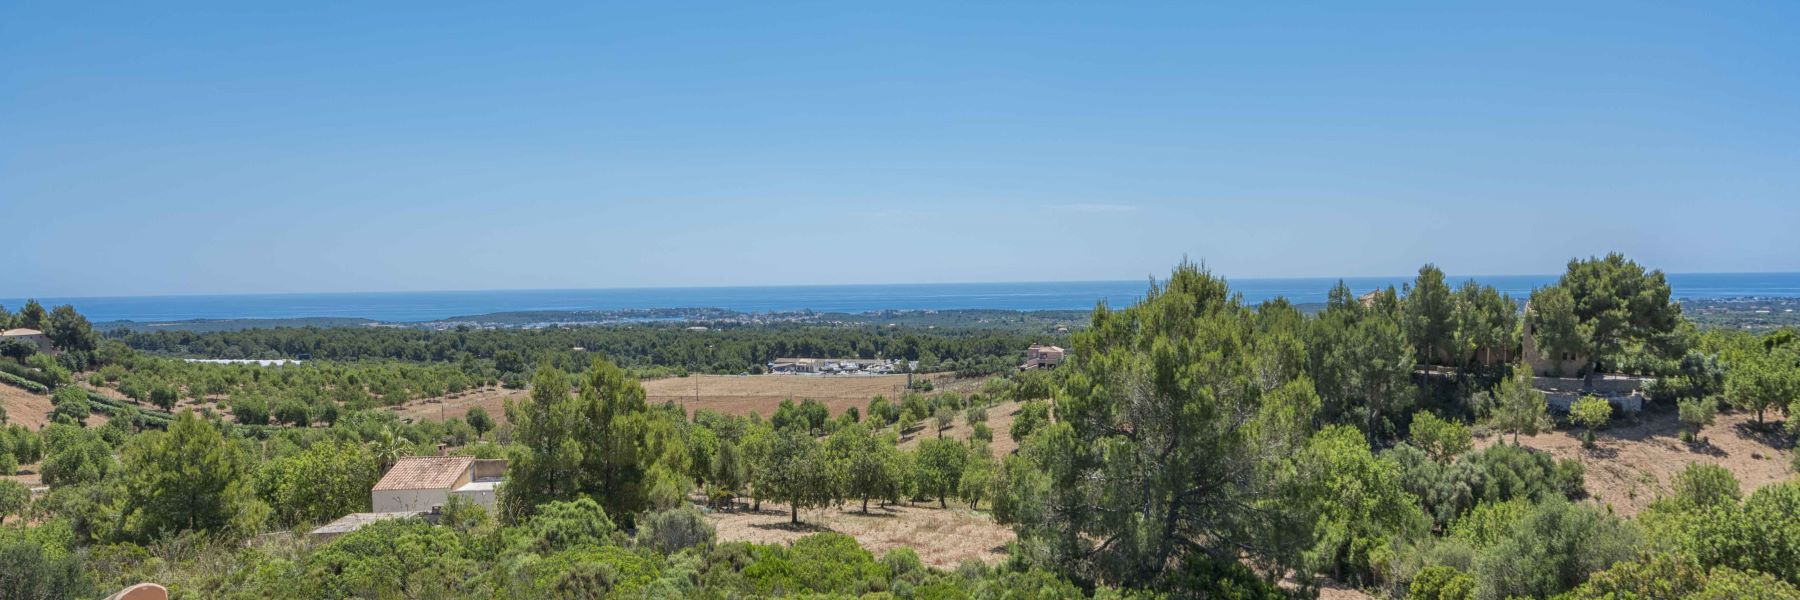 Equipment and accessories Finca Portocolom for 6 persons on Majorca